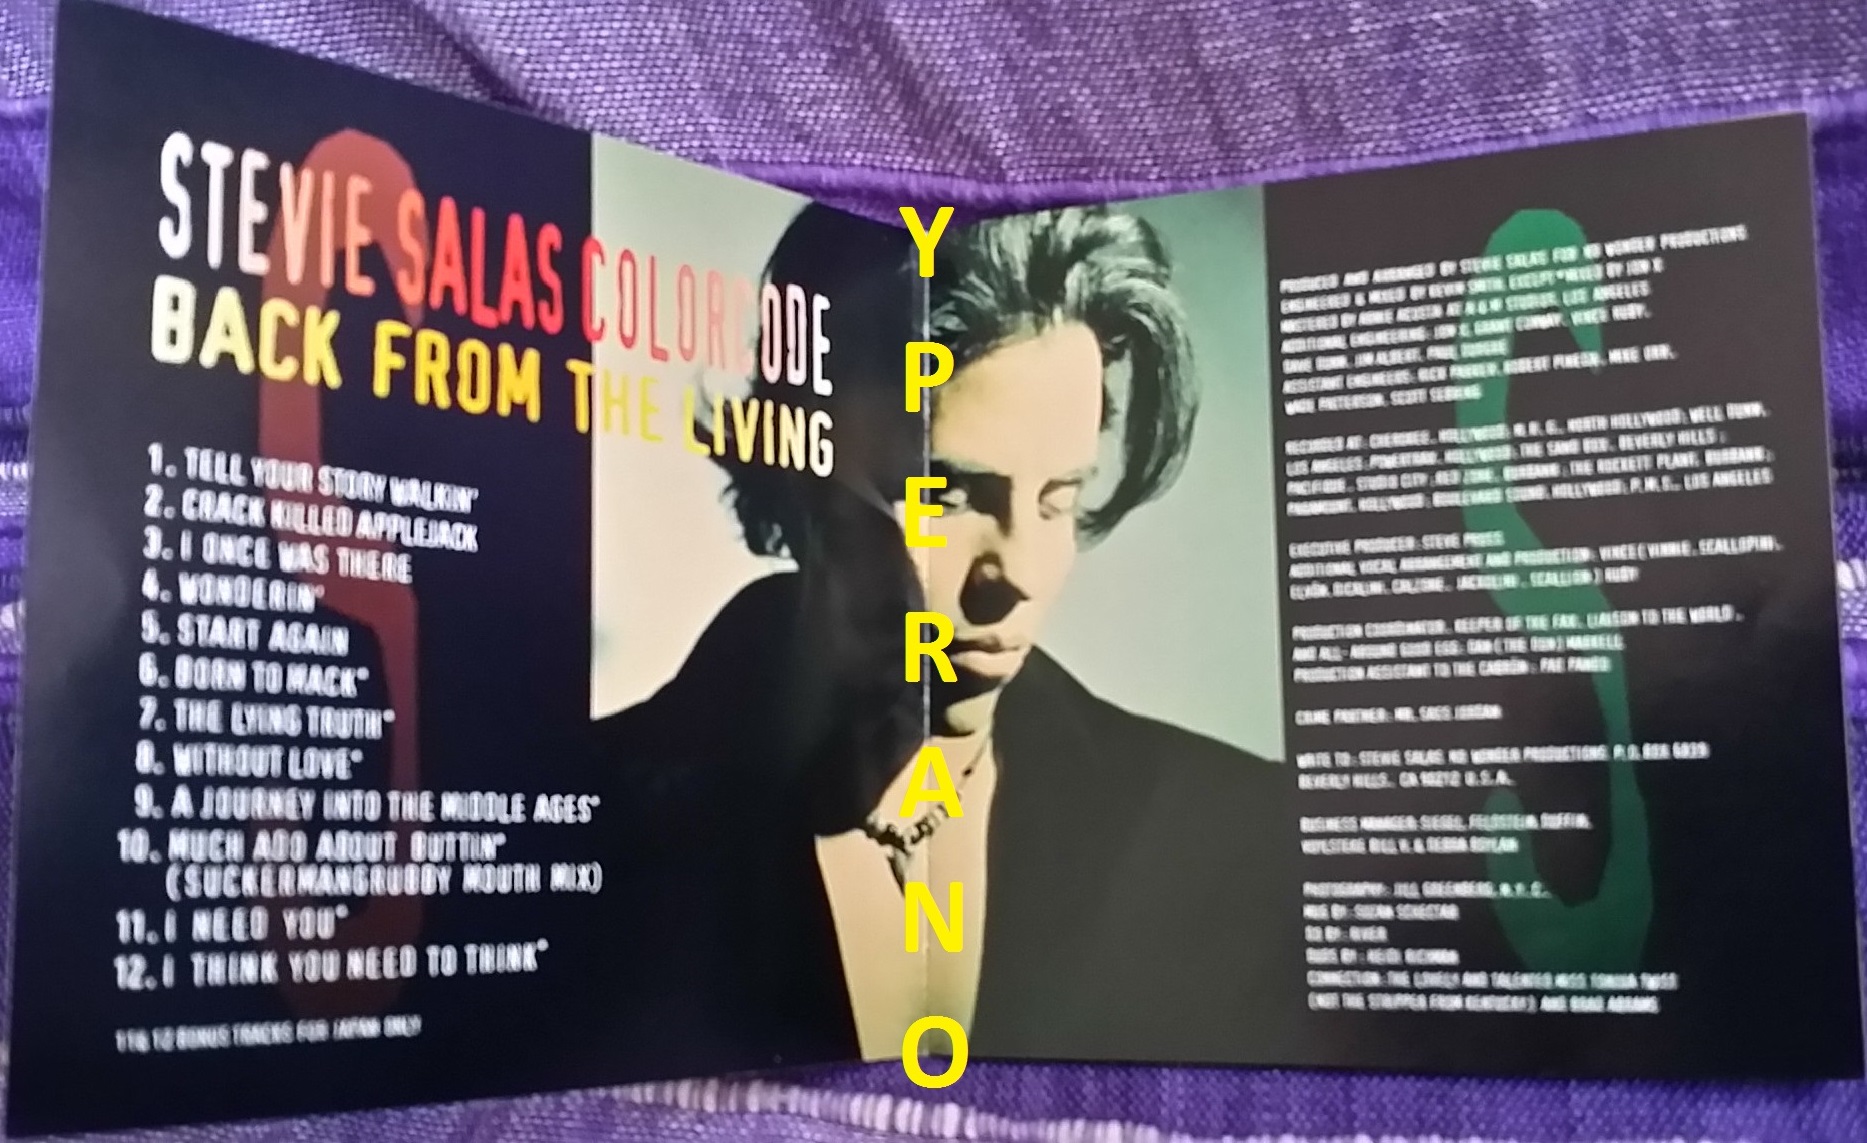 Stevie Salas Colorcode Back From The Living Cd 1994 Japanese Import With Extra Songs Funky Hard Rock Check Audio Whole Album Video Yperano Records